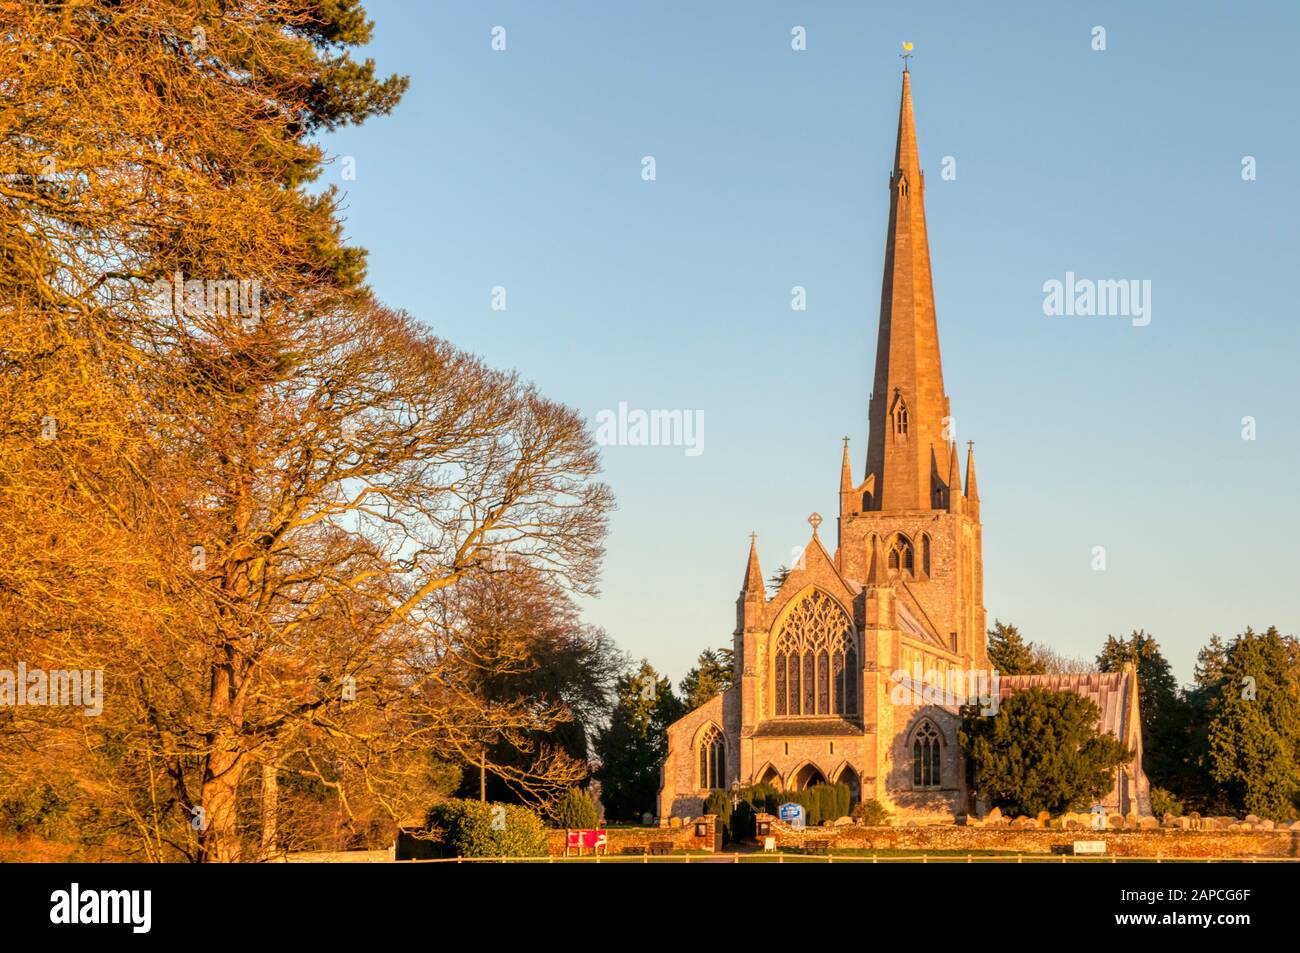 Evening sunlight catches the west front of St Mary's church in Snettisham. Pevsner called it 'perhaps the most exciting Decorated church in Norfolk'. Stock Photo